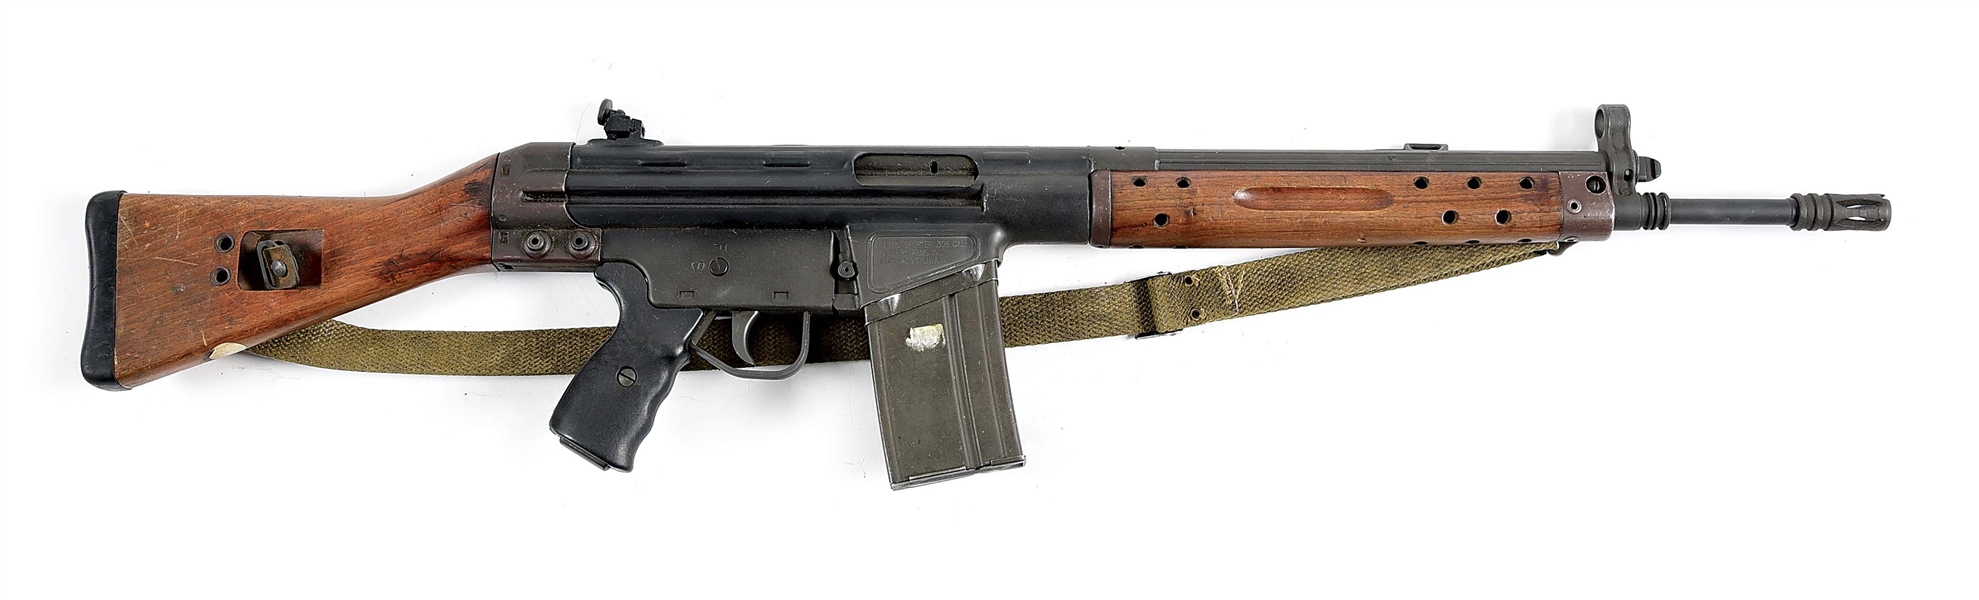 (C) CENTURY ARMS CETME SEMI-AUTOMATIC RIFLE WITH ACCESSORIES.